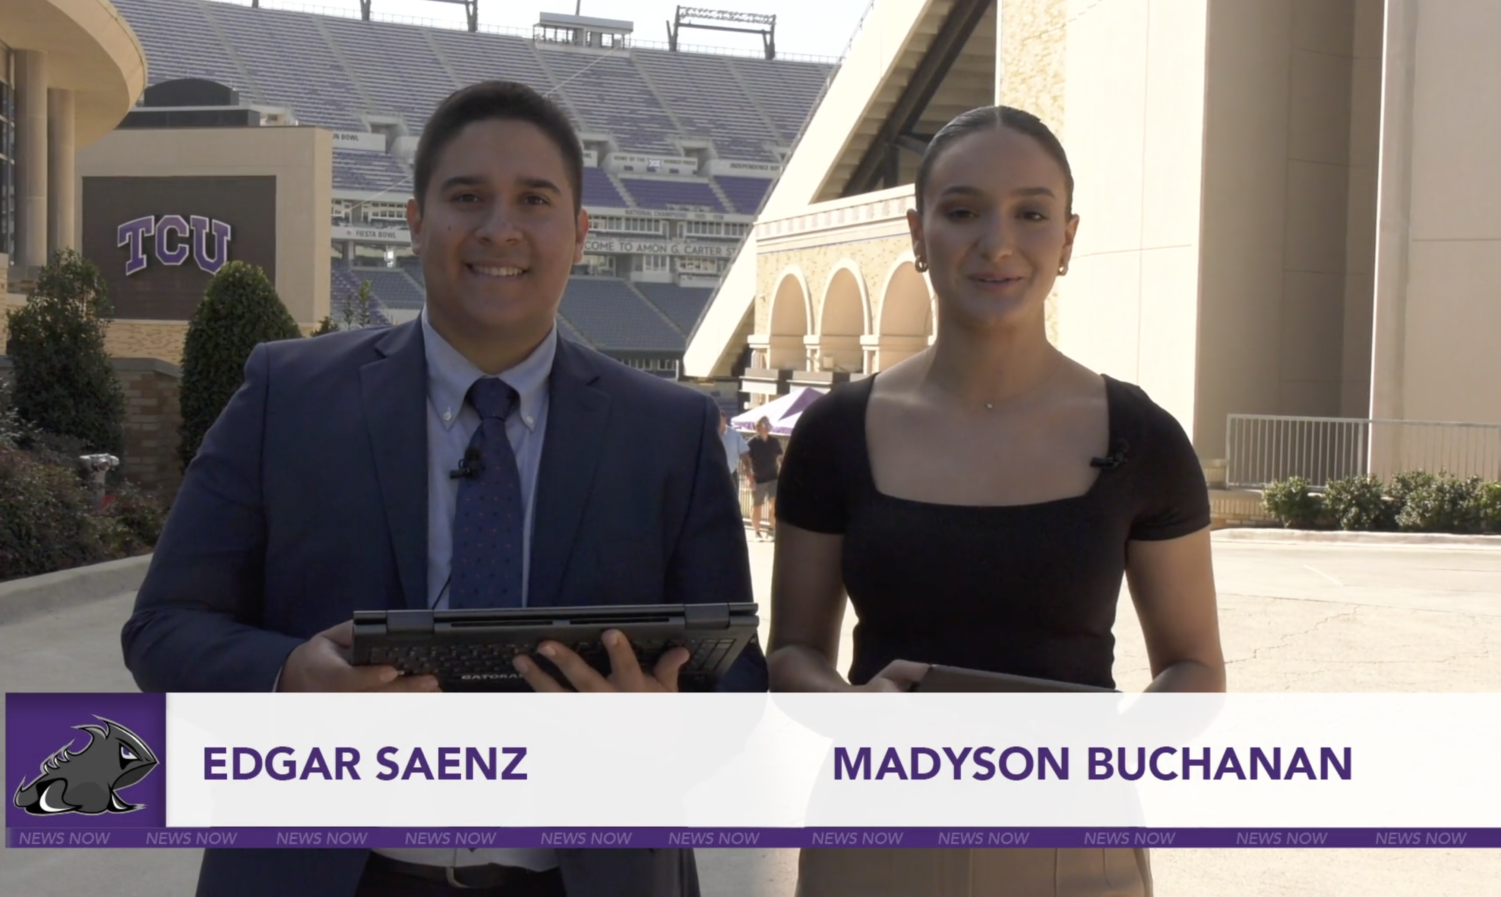 Two student journalists report from outside the T C U football arena. A graphic on screen identifies them as Edgar Saenz and Madyson Buchanan.